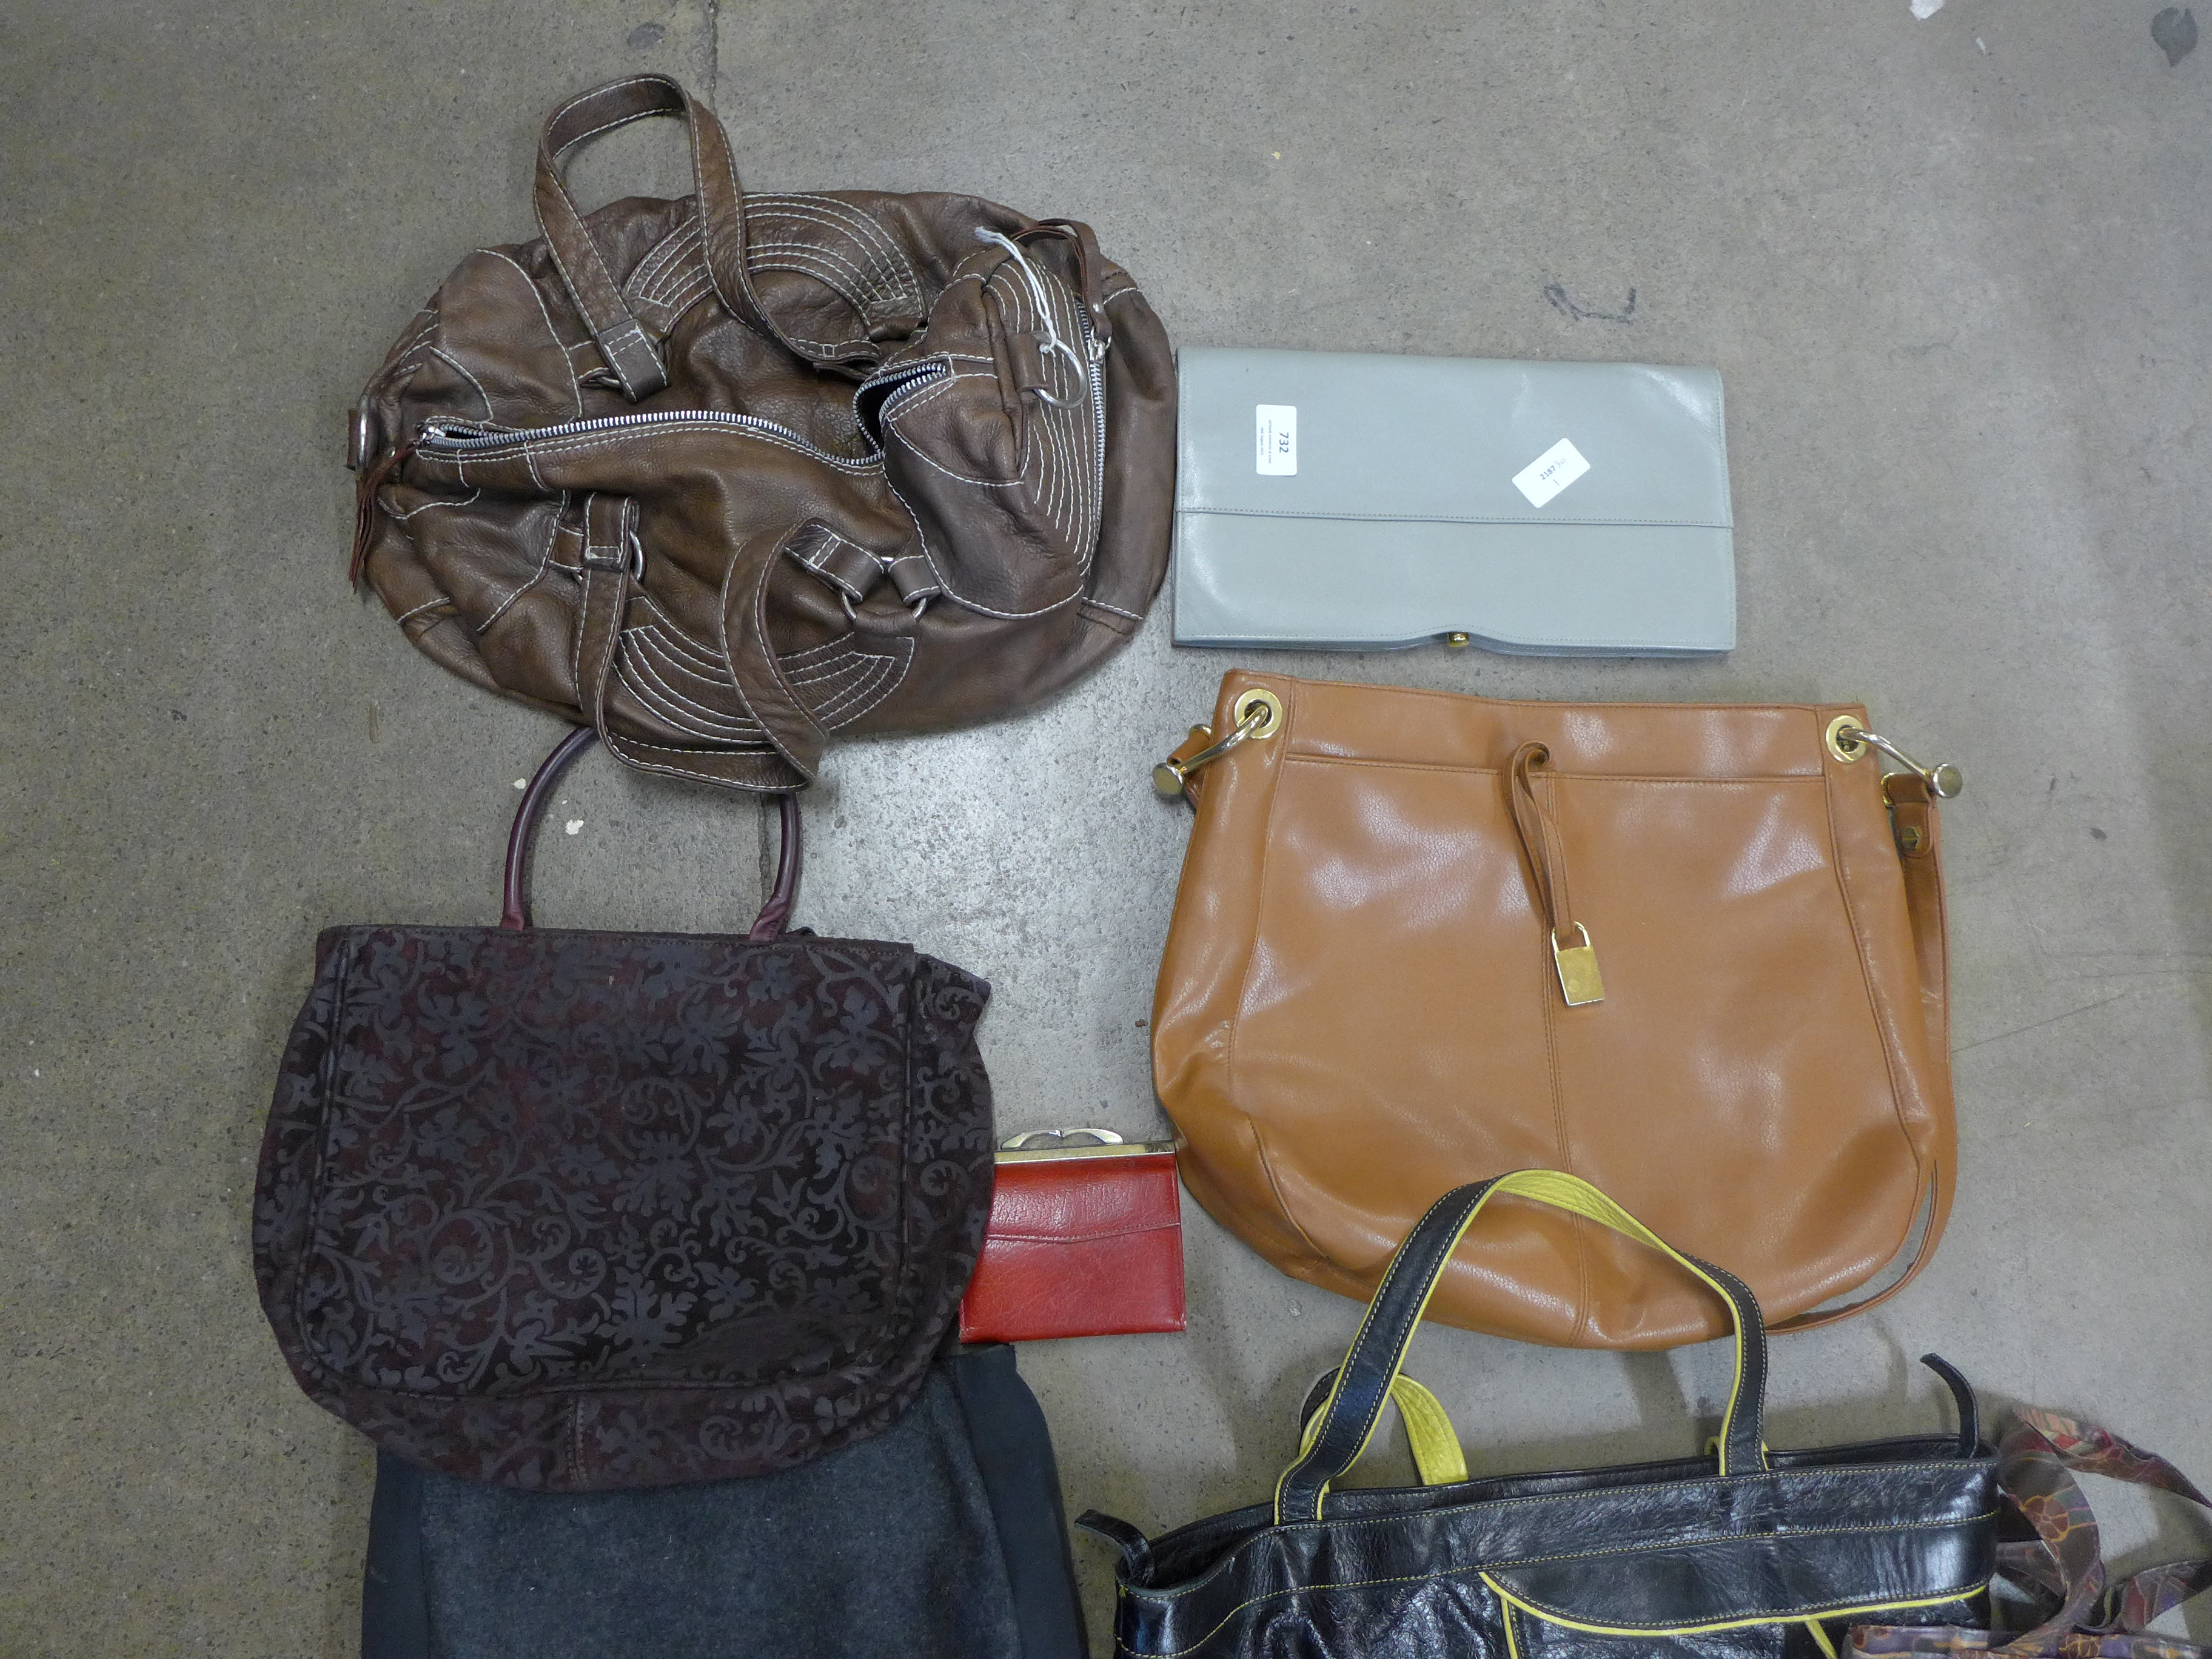 A collection of handbags including Liberty, Ted Baker, Suzi Smith, etc. - Image 2 of 3